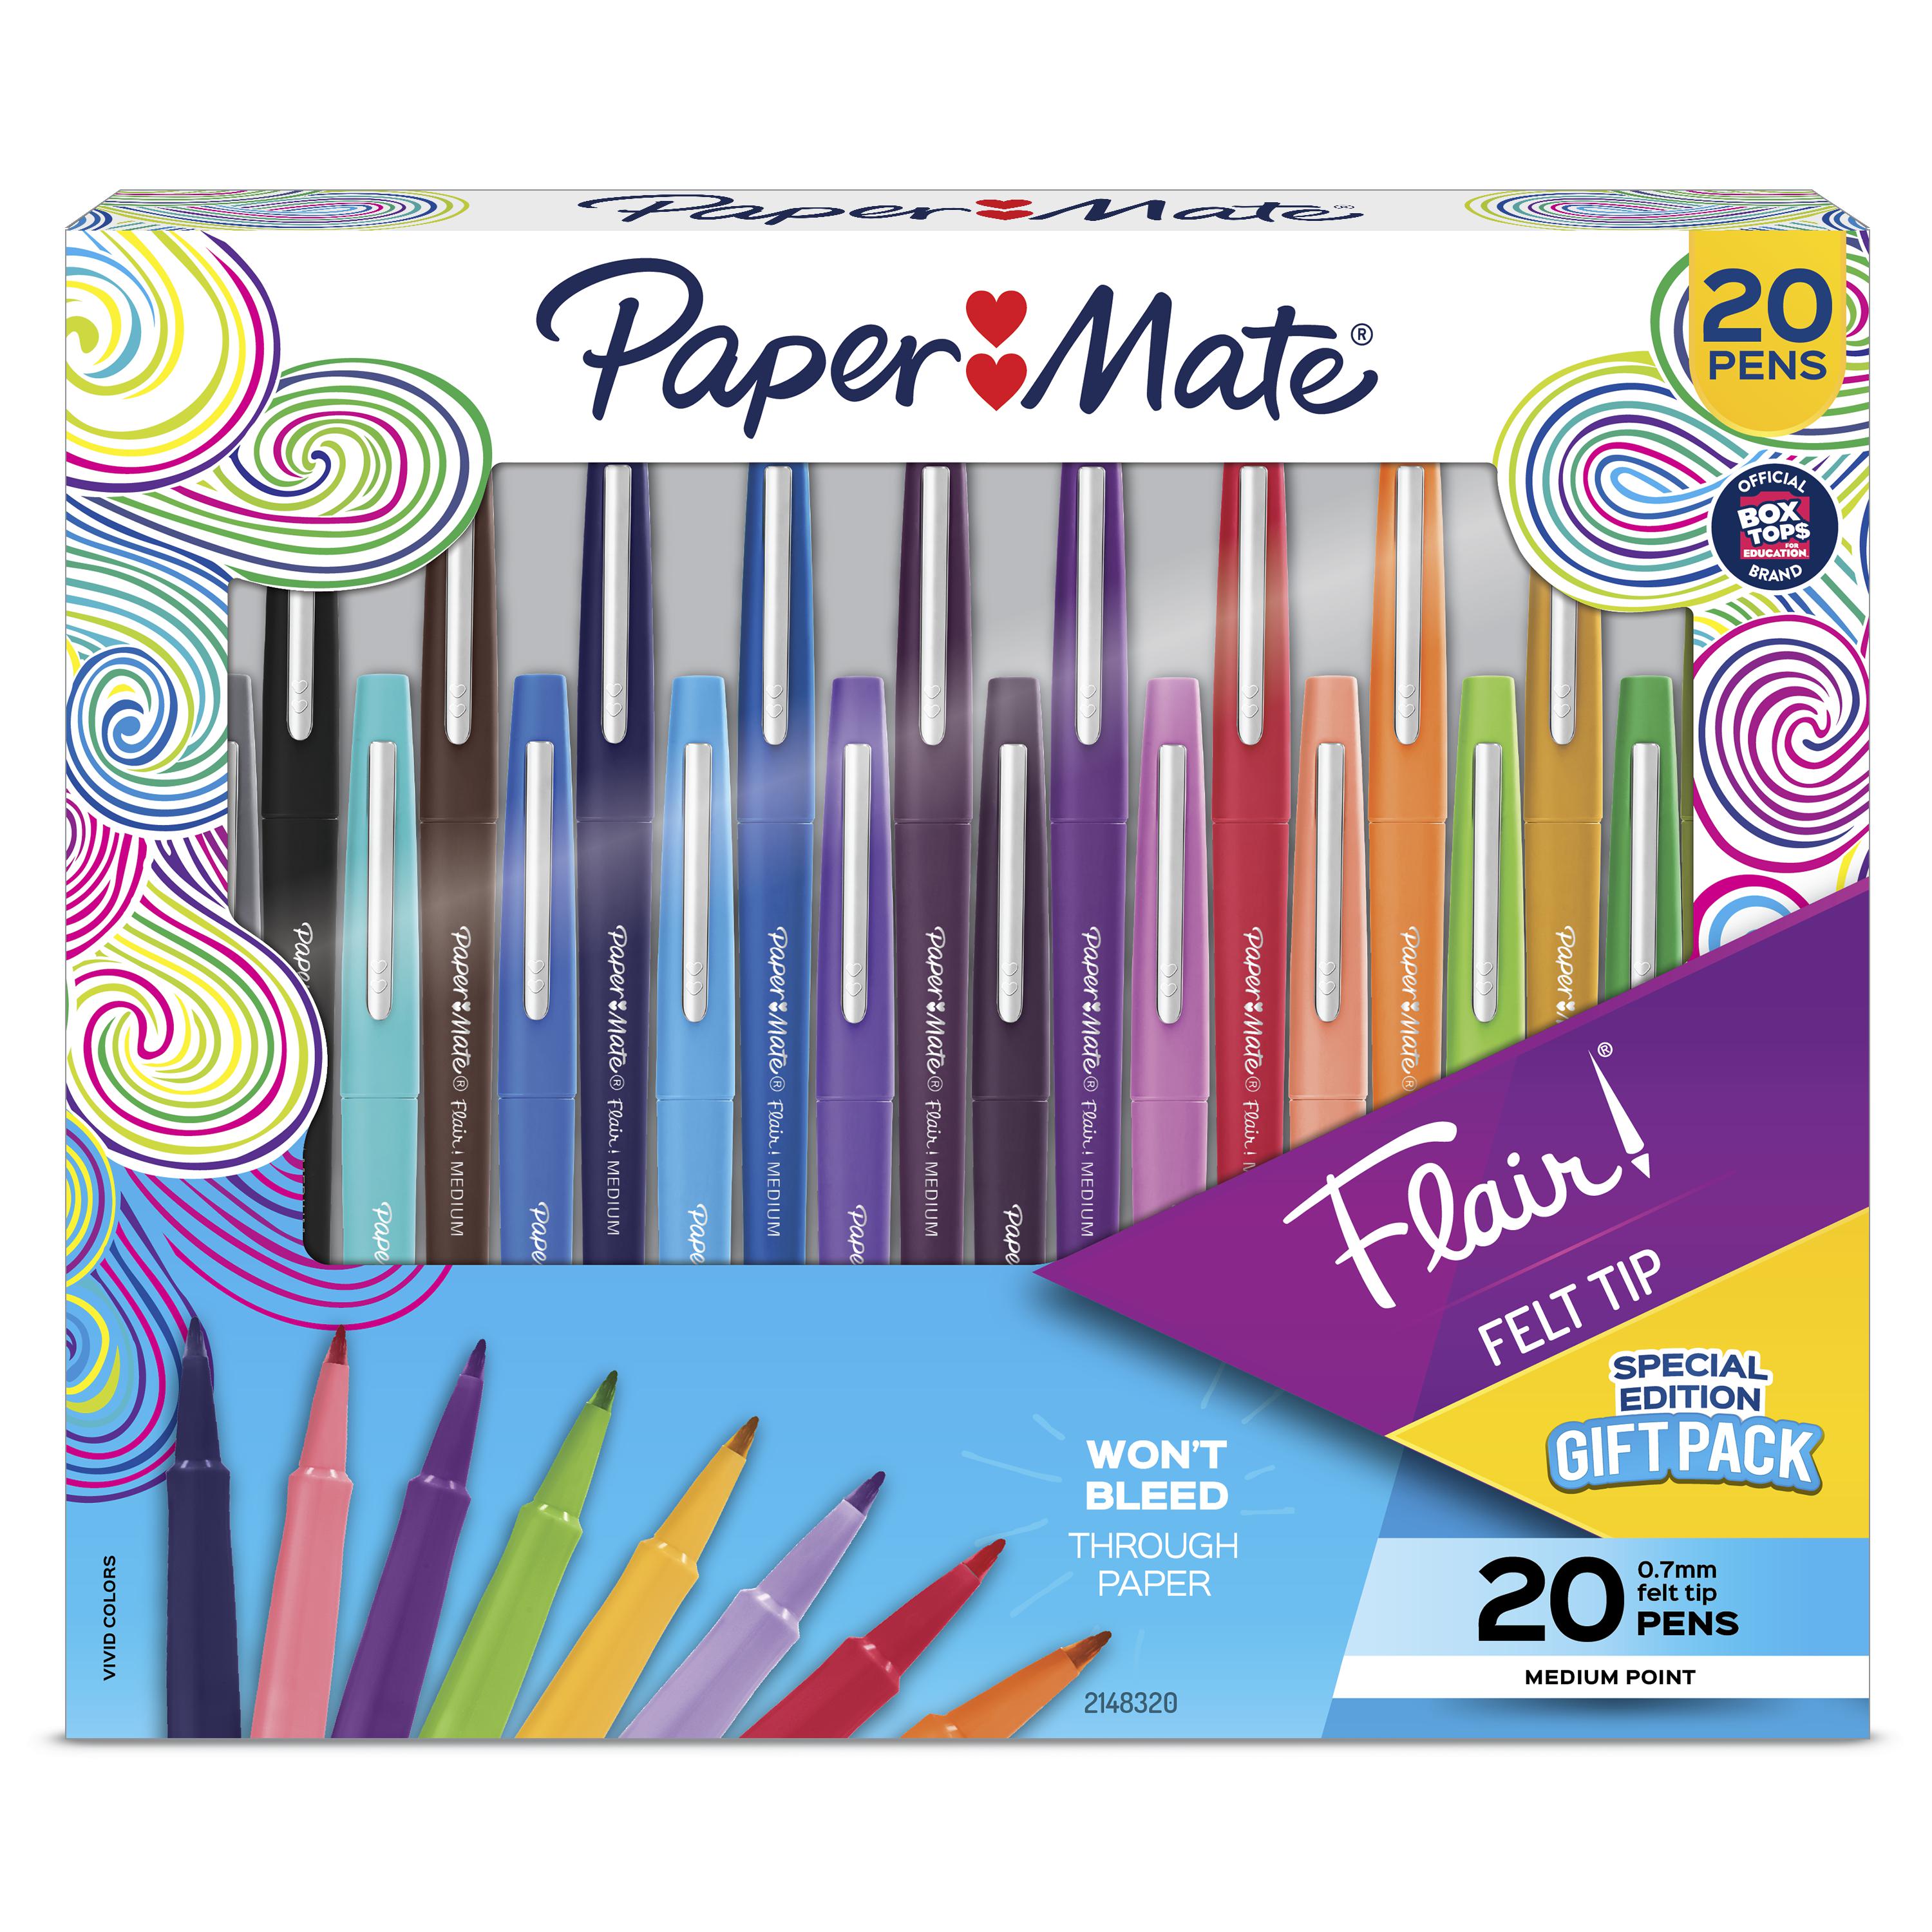 Paper Mate Flair Pens - Pack of 20 Assorted Colors for $10.00 at Walmart